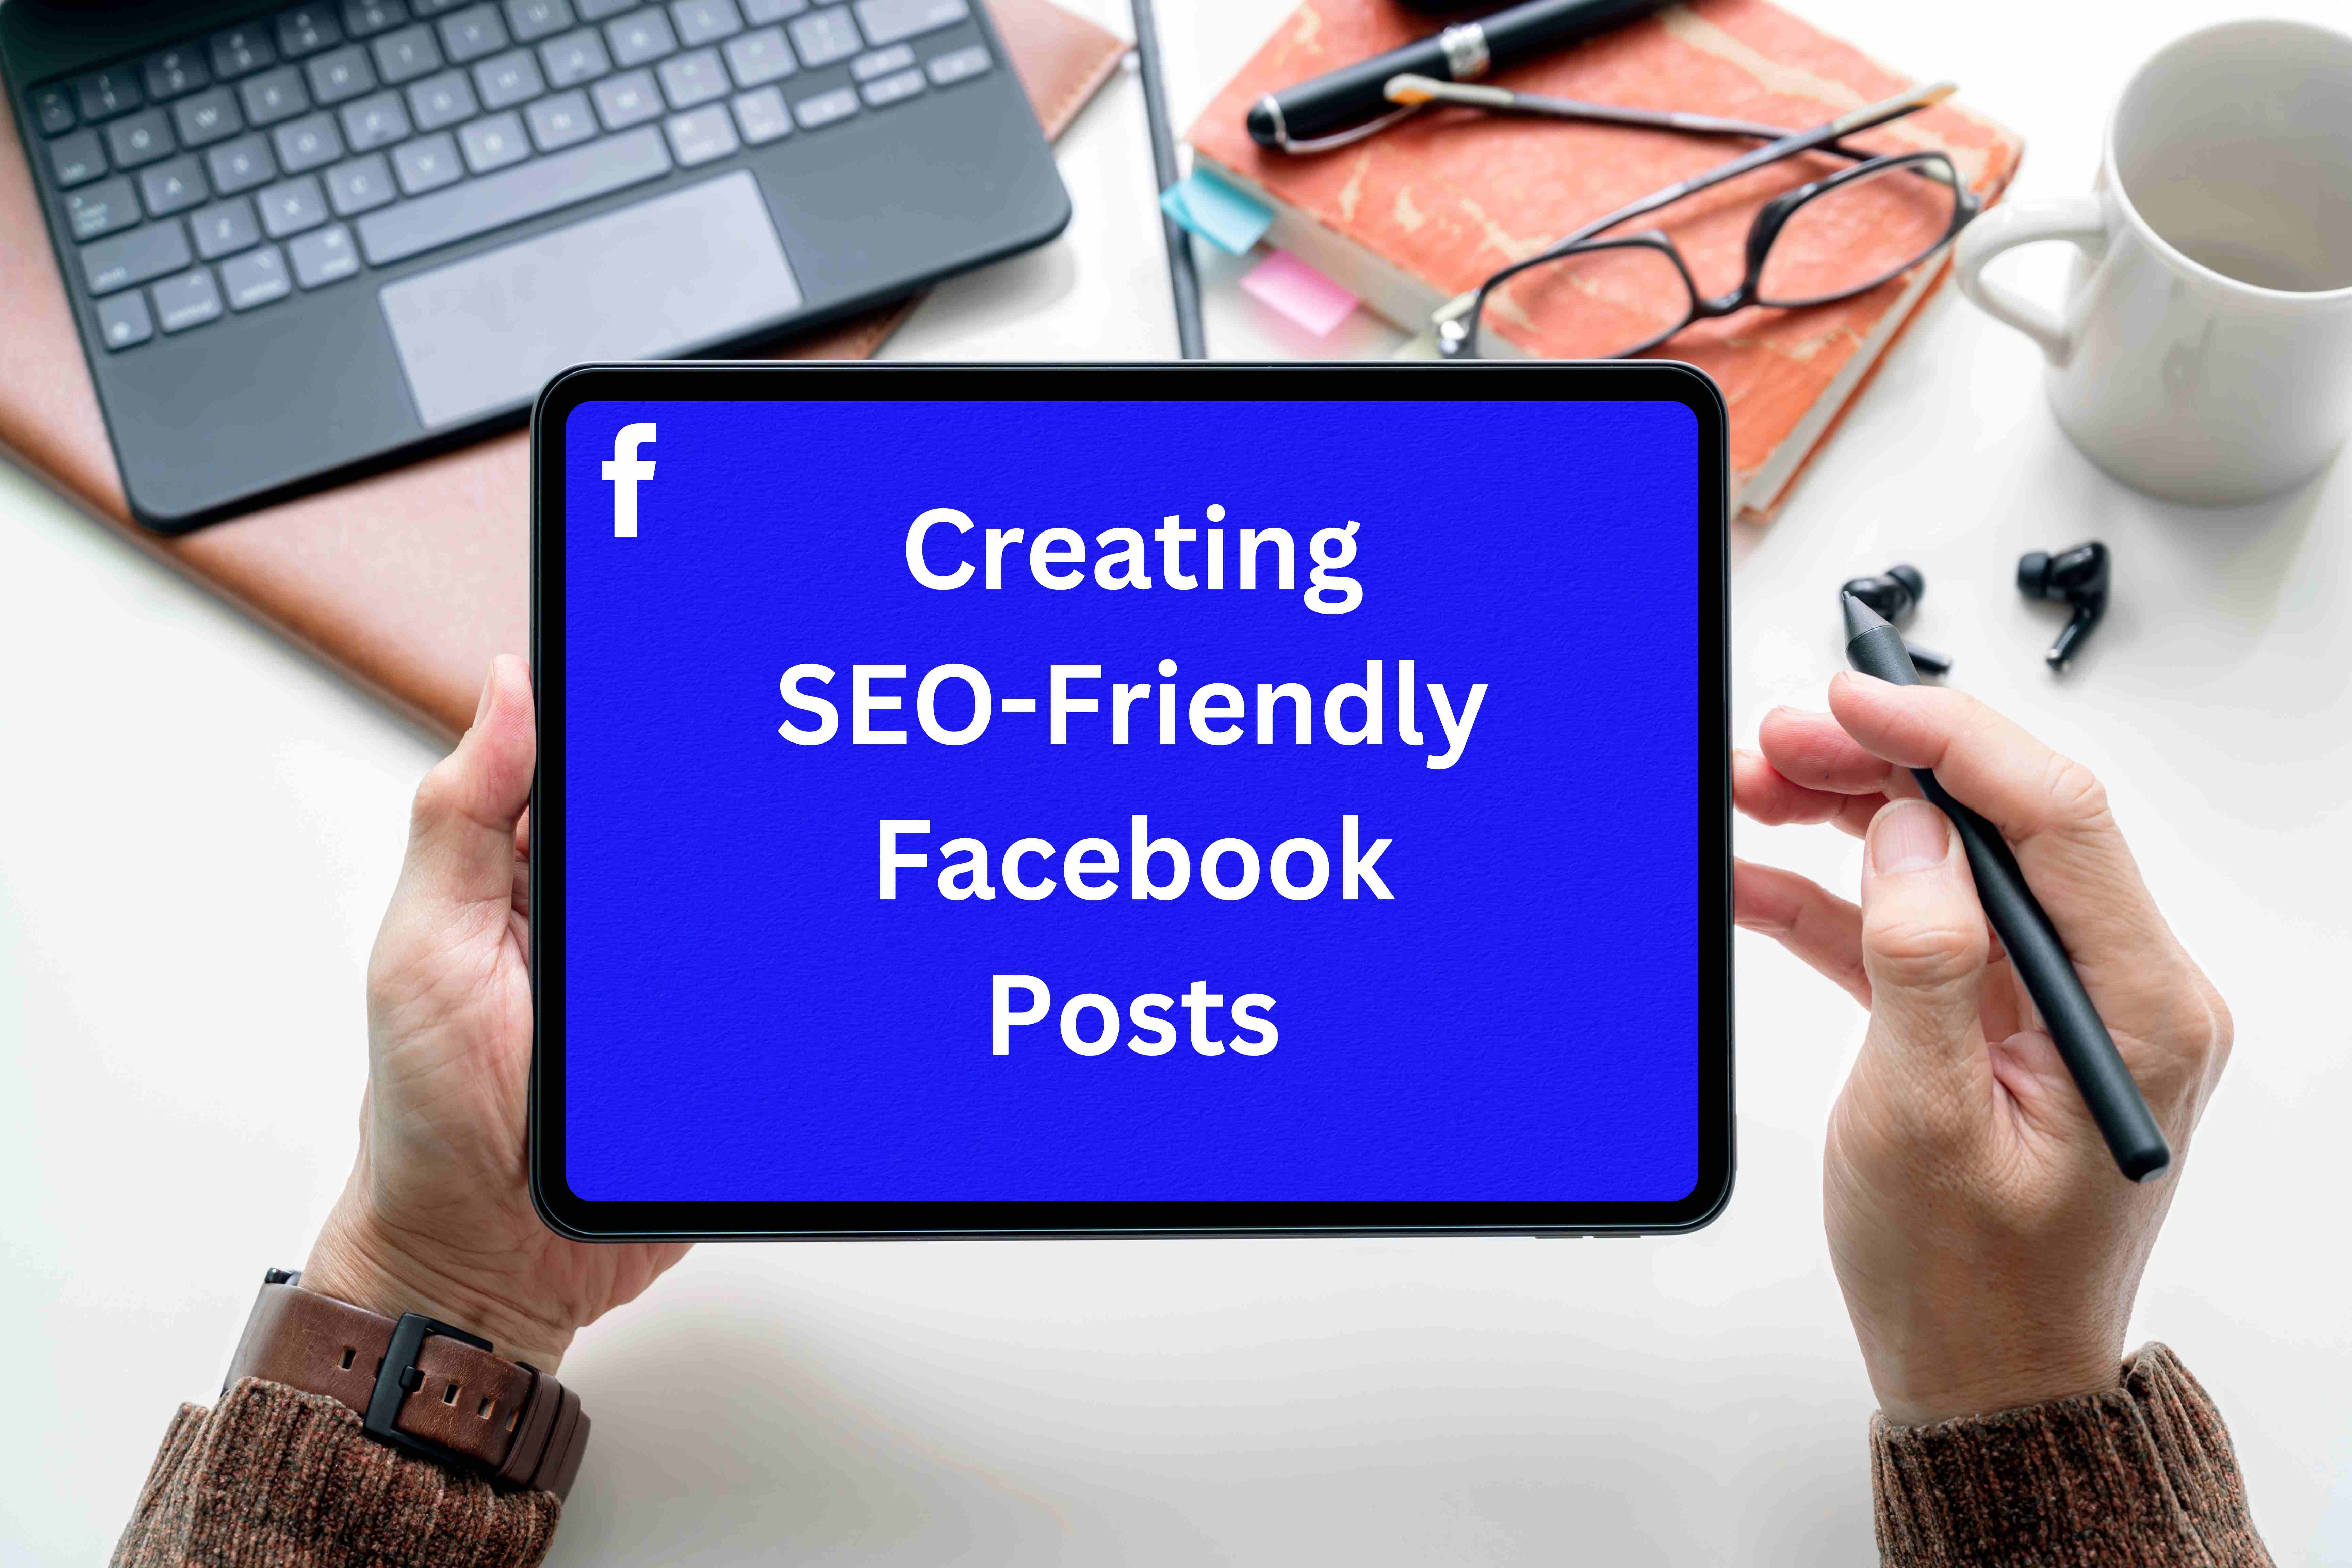 Creating SEO-Friendly Facebook Posts